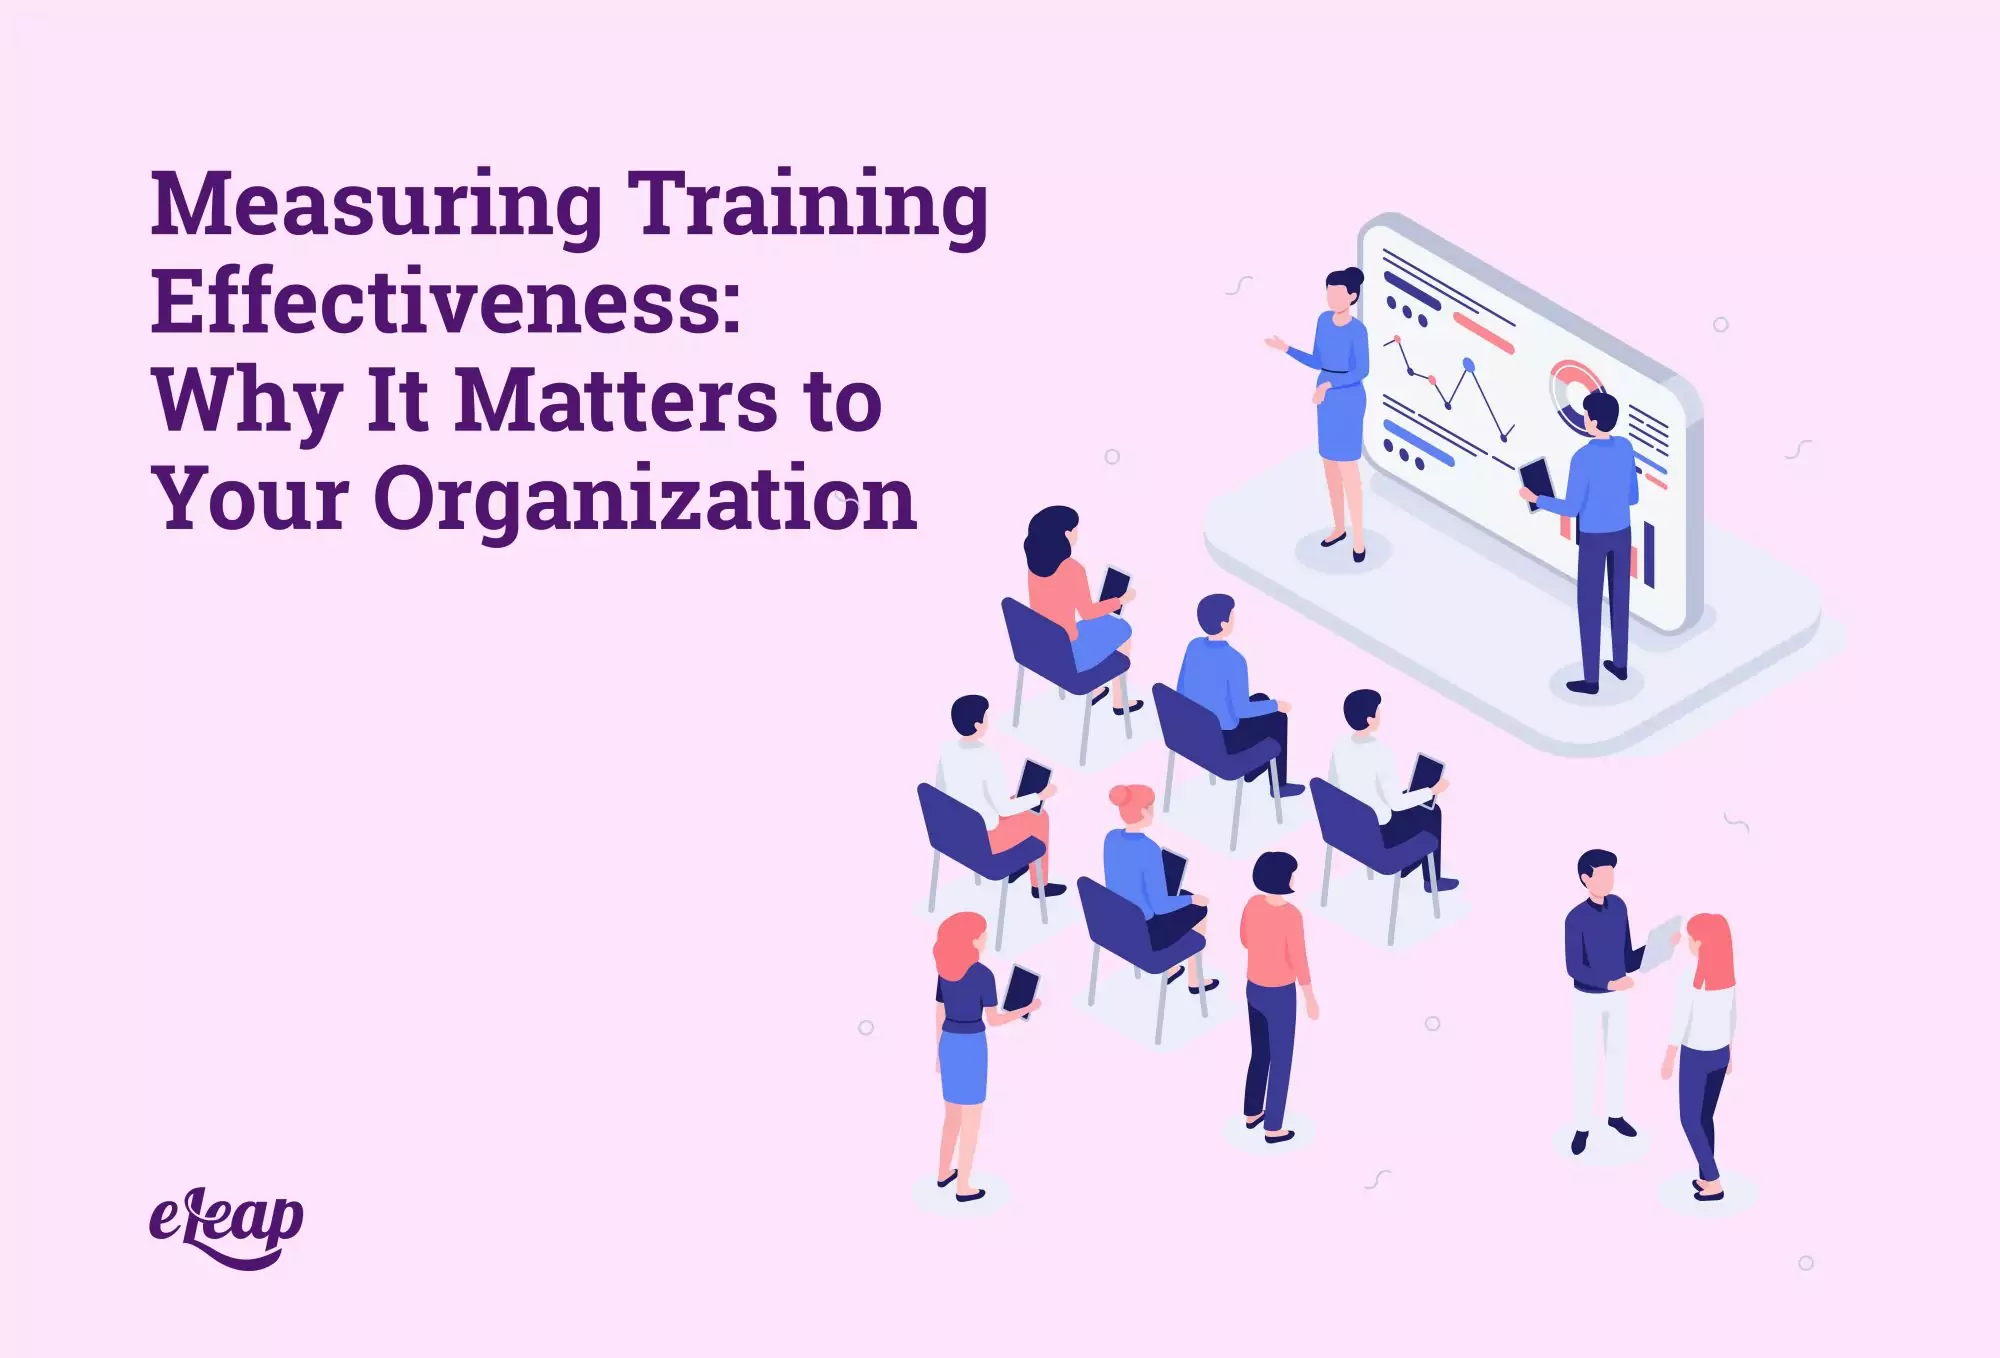 Measuring Training Effectiveness: Why It Matters to Your Organization